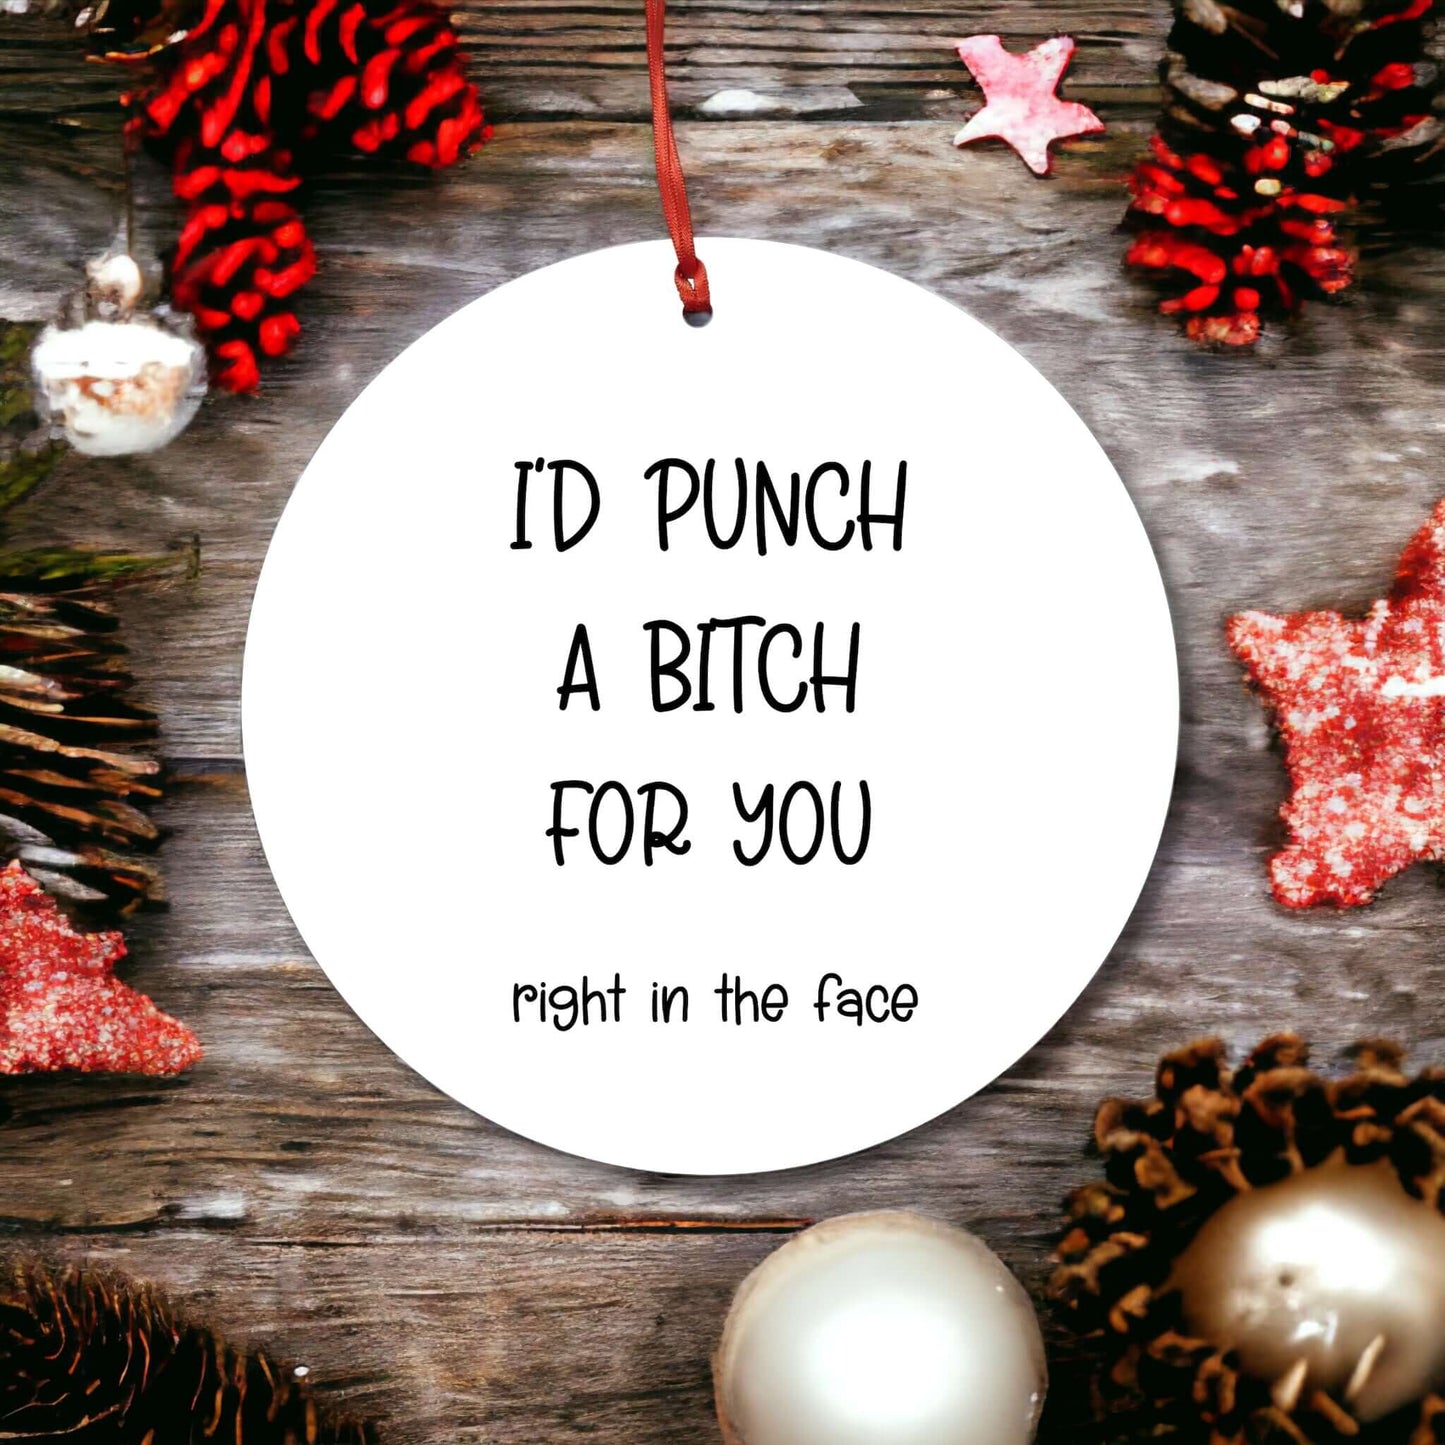 Funny Friendship Ornament - Unique BFF Gift: 'I'd Throw a Punch for You' Hilarious Christmas Tree Decor